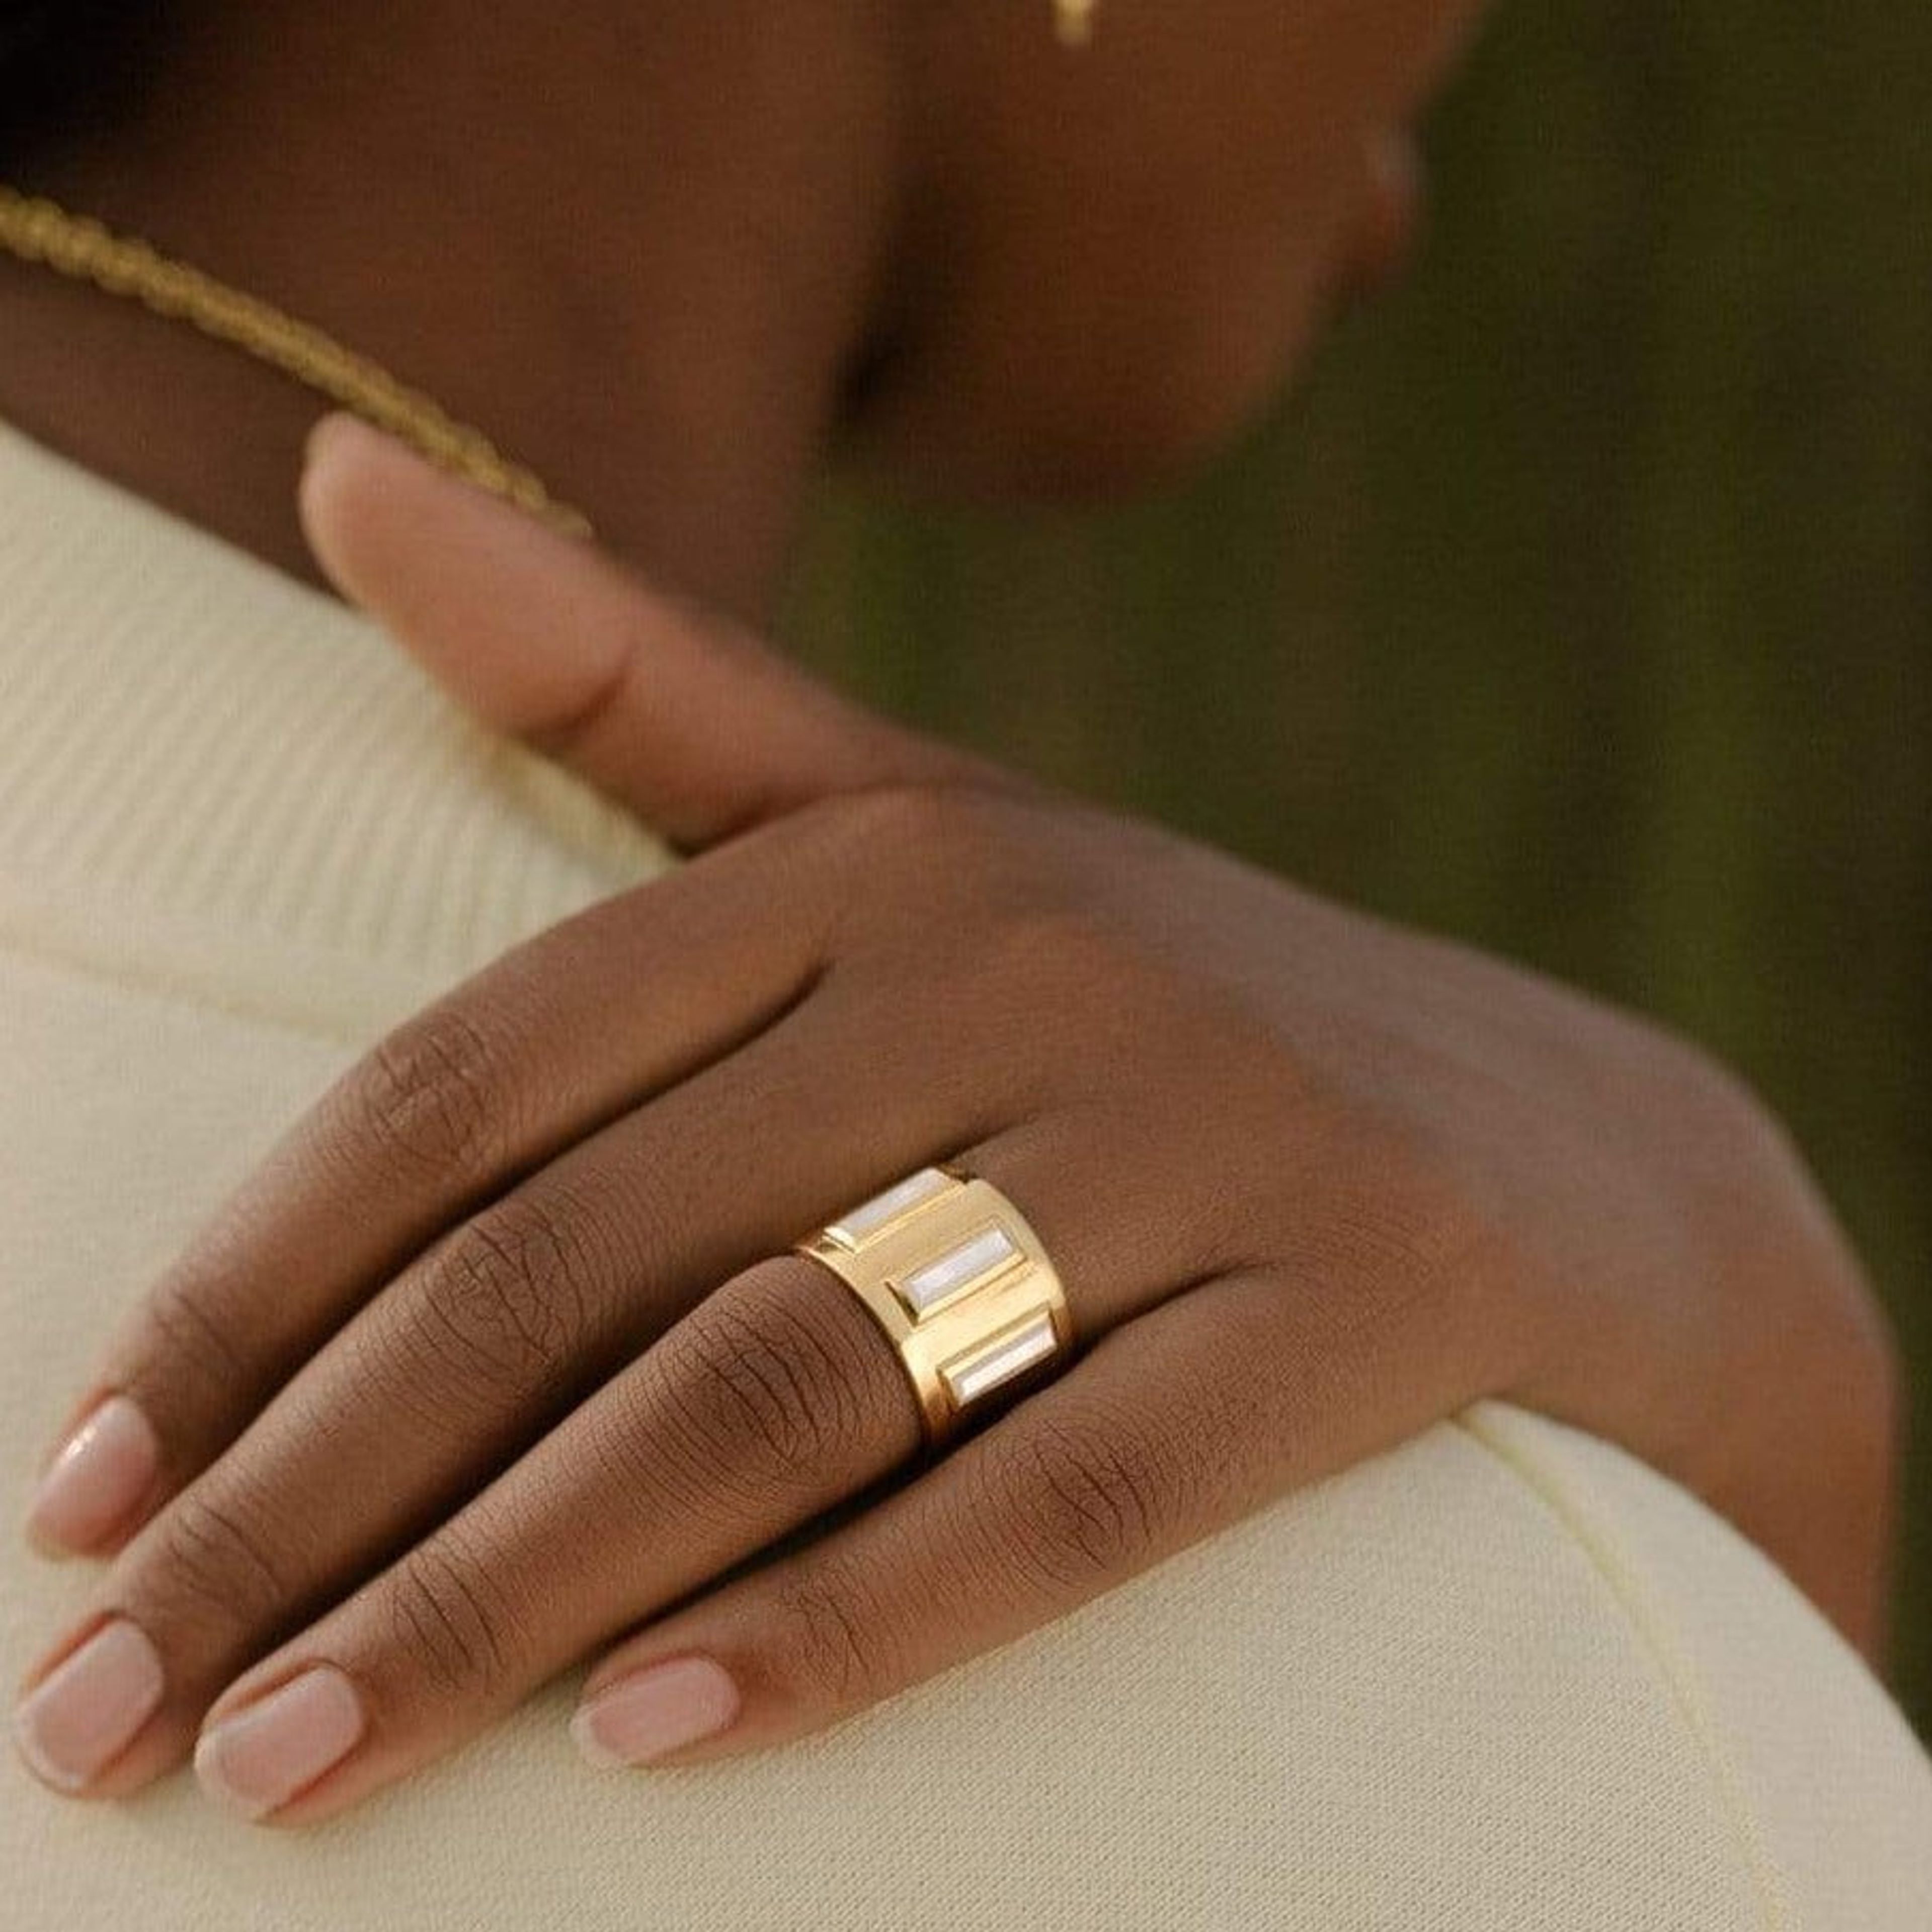 Gigi Banded Ring with Baguette Mother of Pearl in 14K Gold